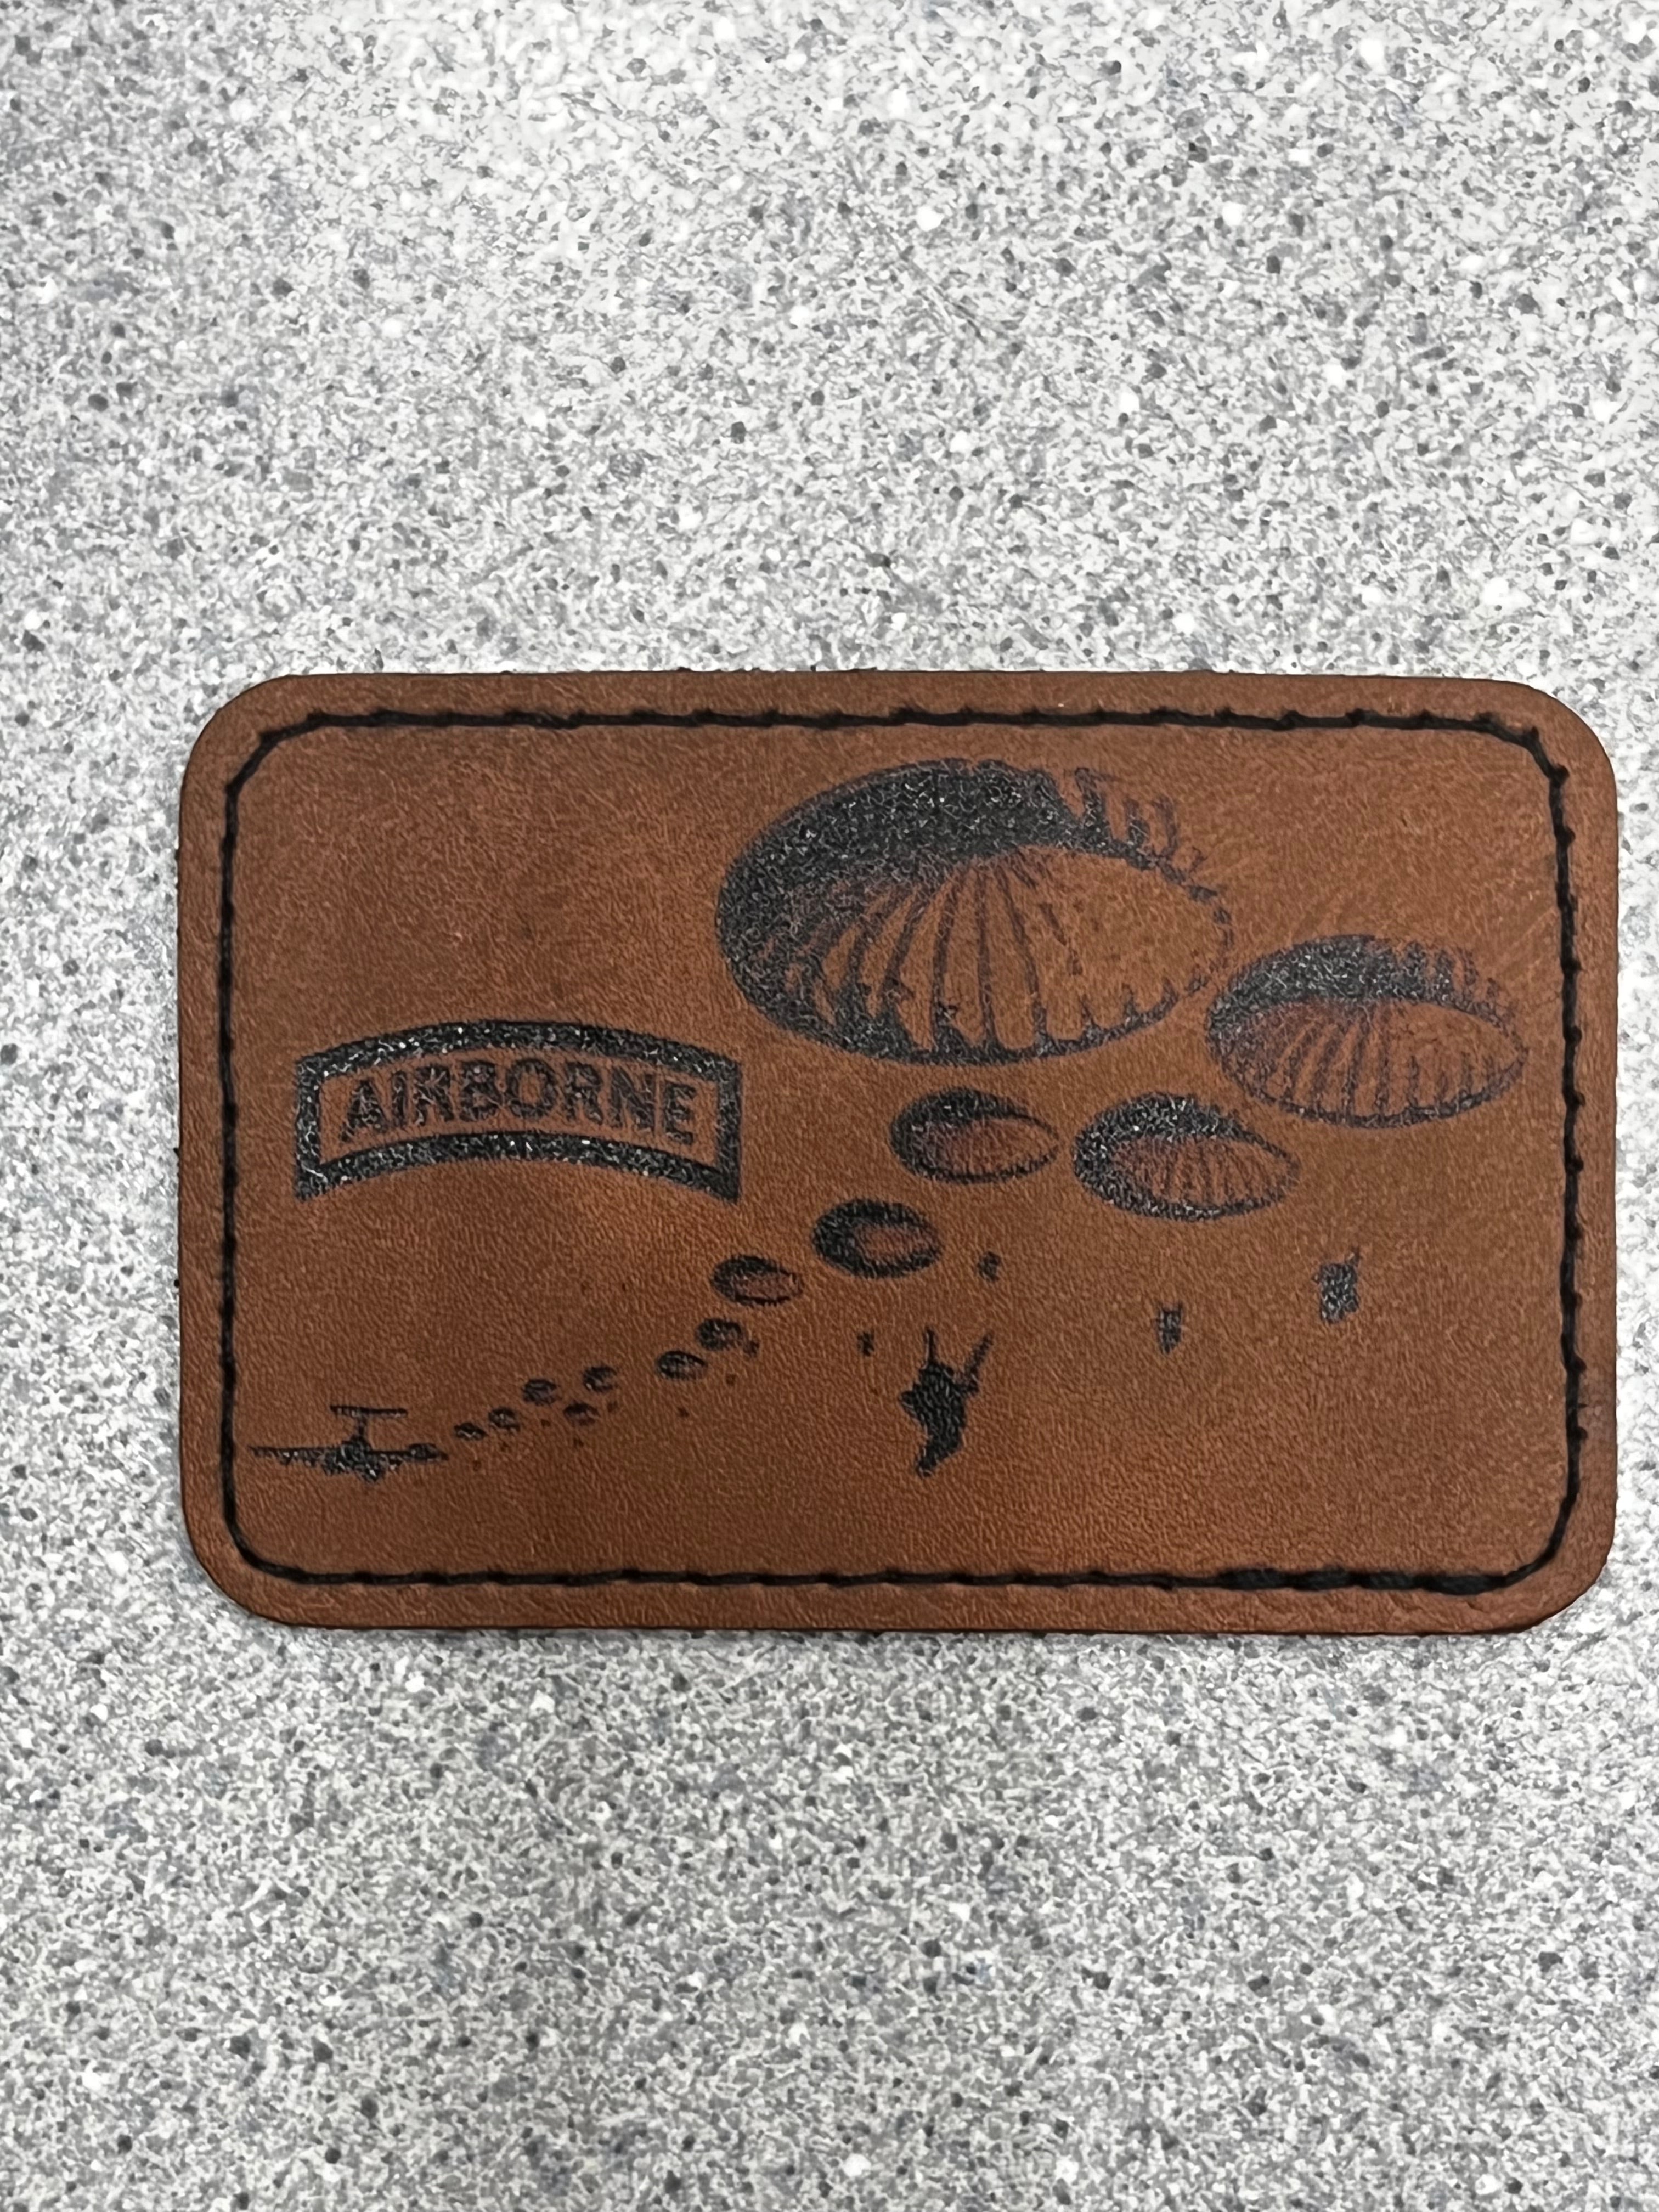 Leather patch jeans Custom leather patches Embroidered leather patches Leather patch jacket Leather patch hat Leather patch logo Leather label patches Leather patch for bags Leather patchwork Genuine leather patches Leather patch sewing